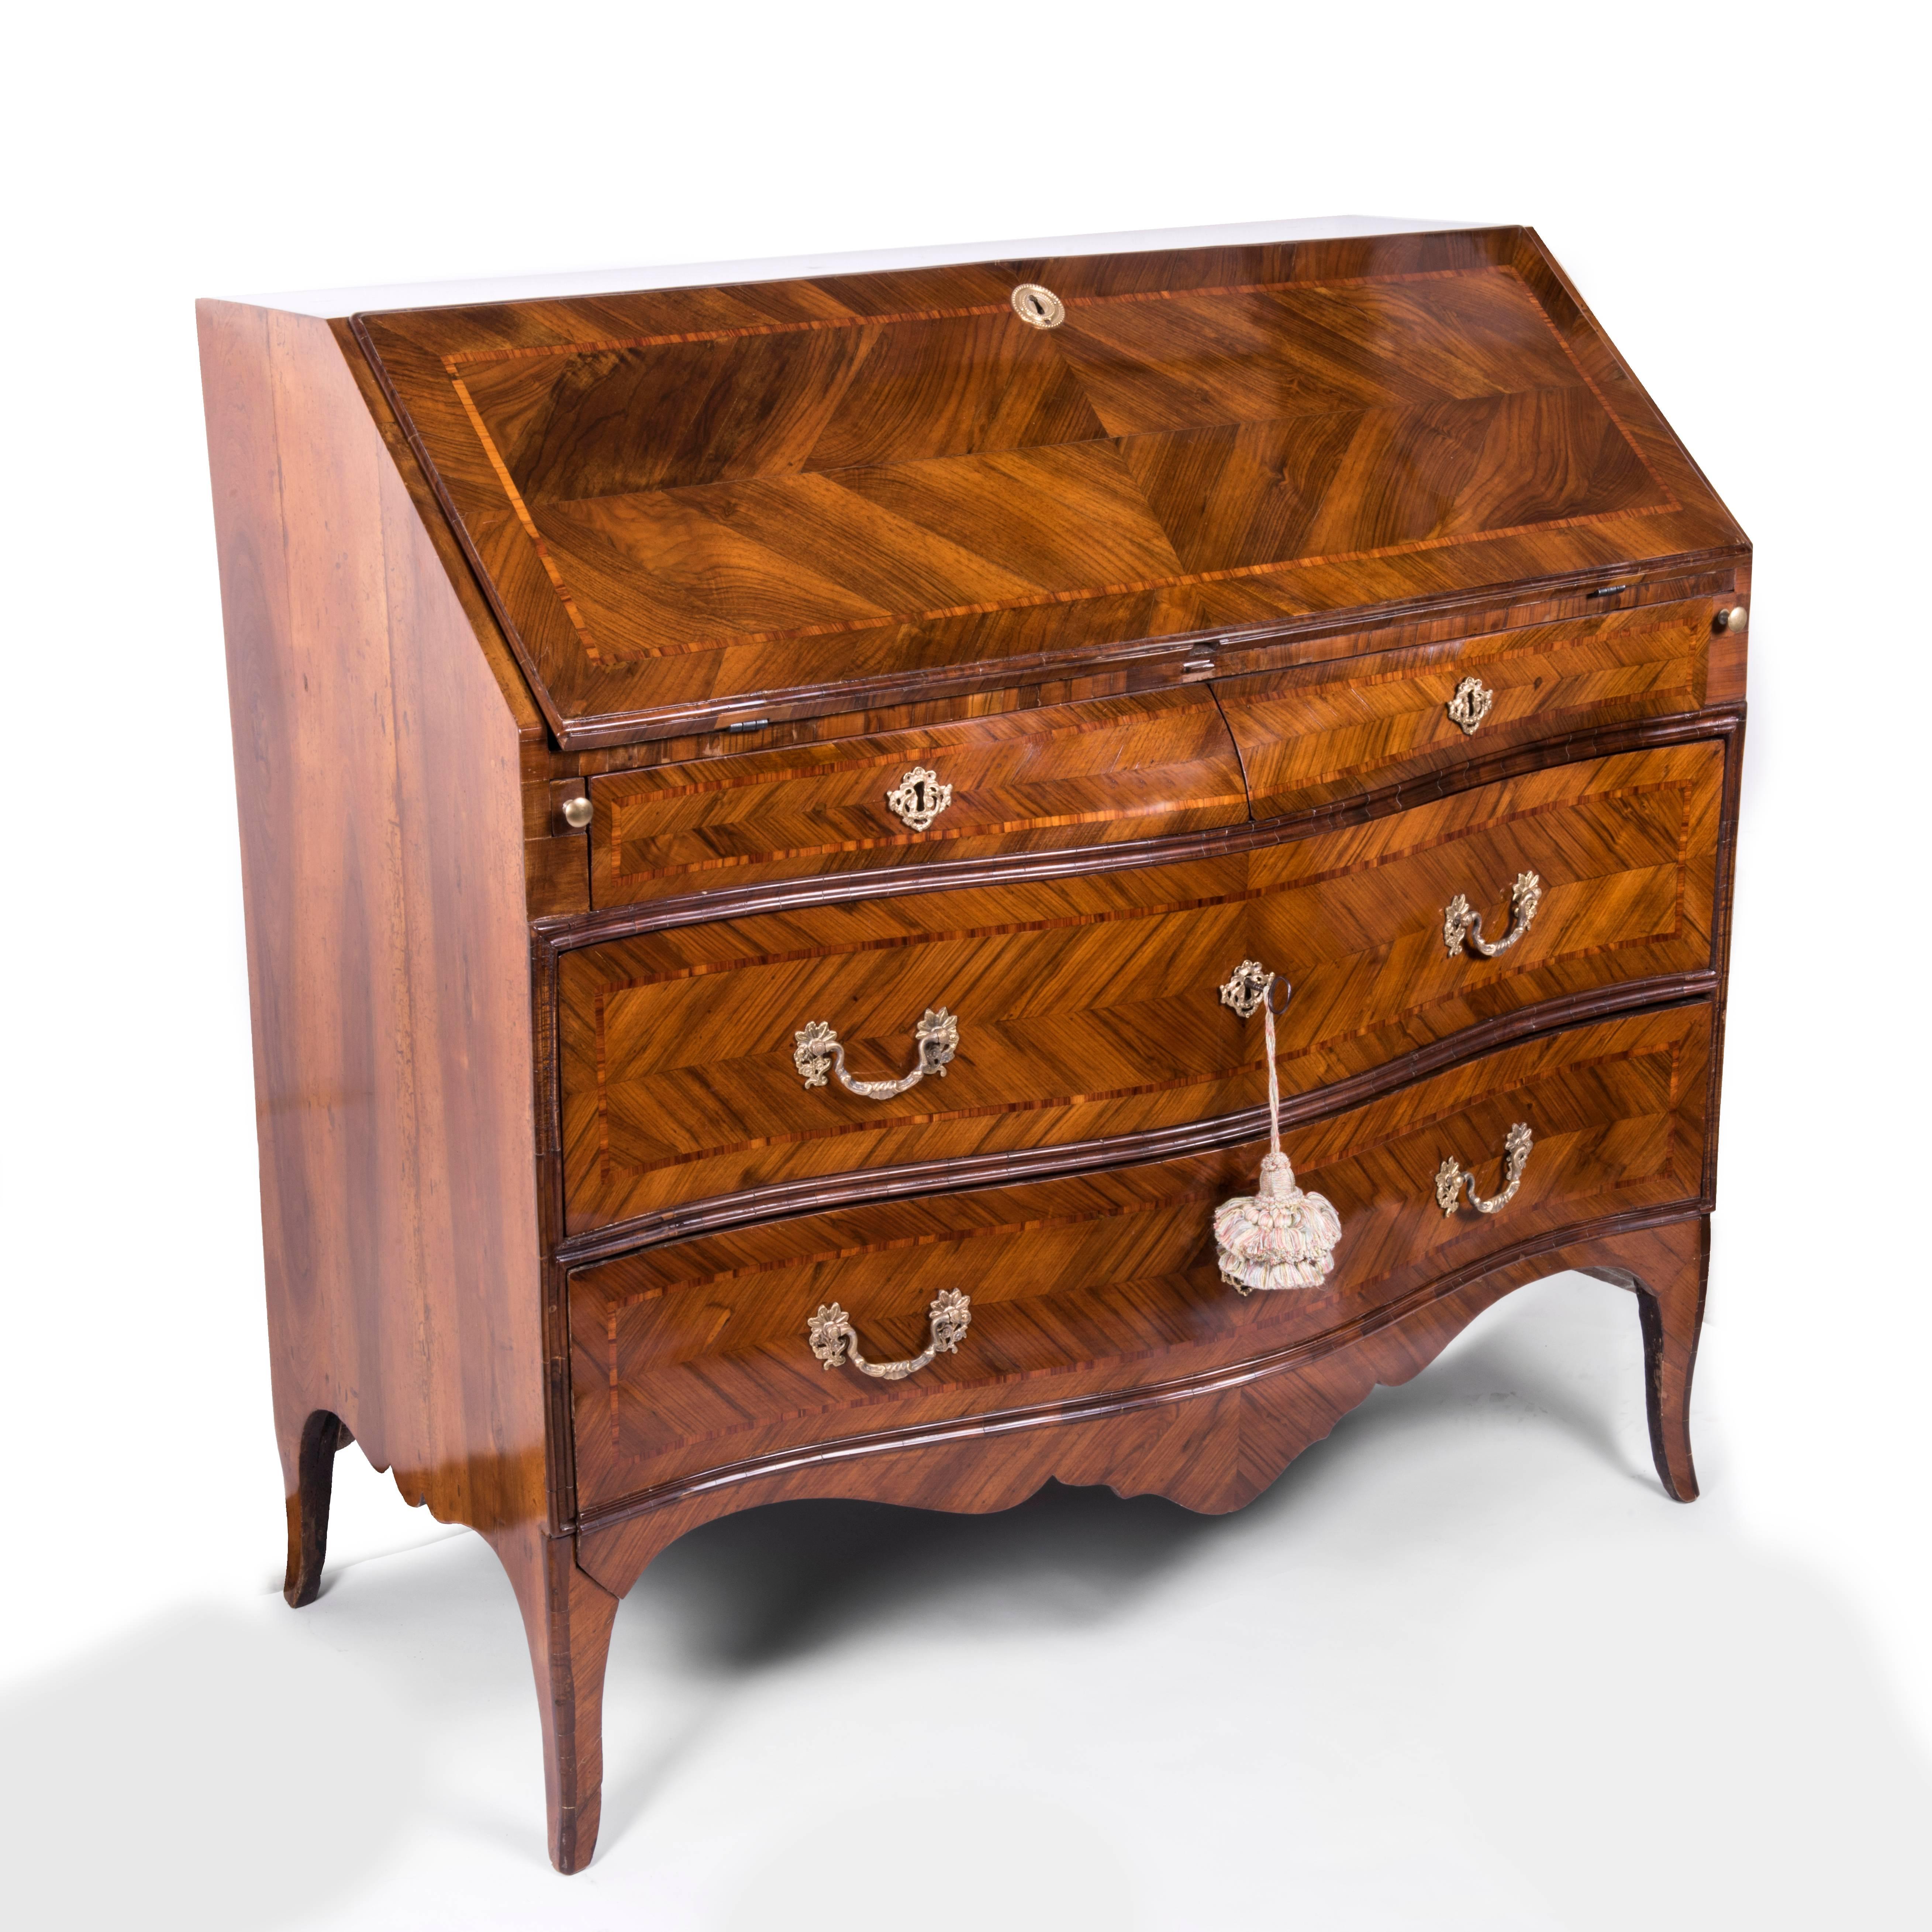 An exceptional Italian Genoese walnut veneered and inlaid fall front bureau secretaire desk, dating back to the third quarter of 18th century, of Genoese origin.

The fall opening to a fitted interior of six small drawers, pigeon holes and one